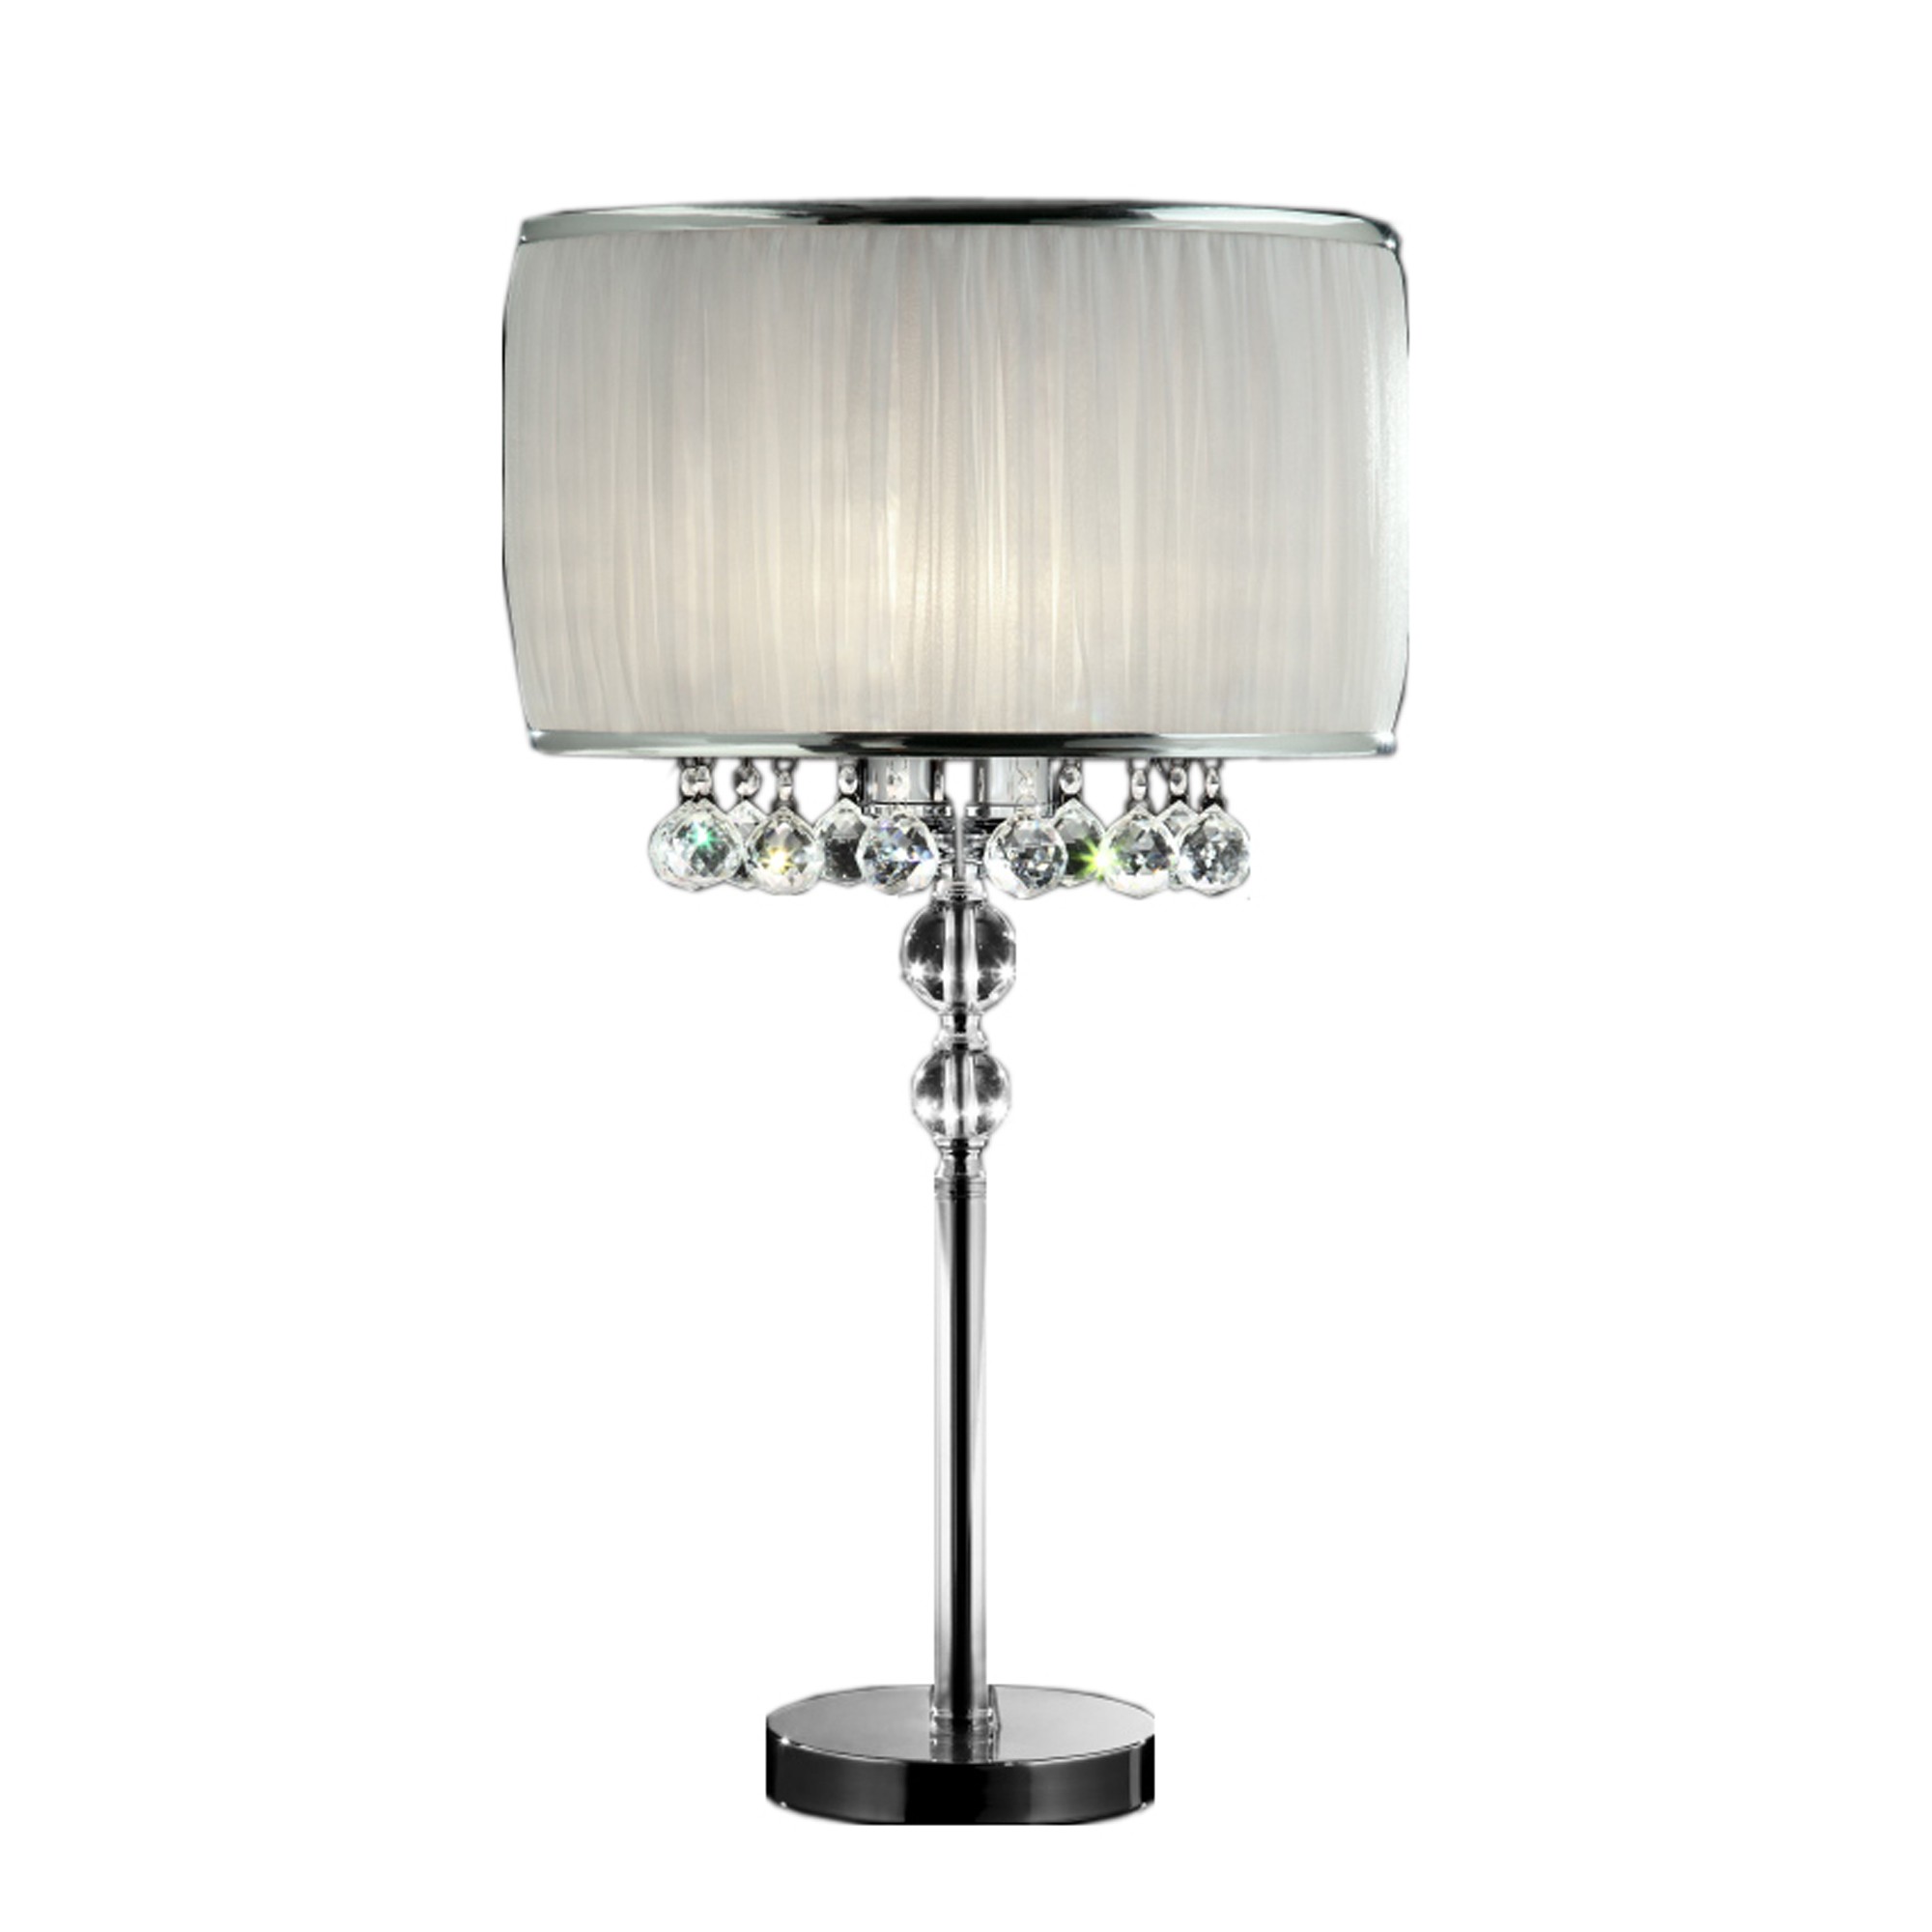 Elegant silver Table Lamp with Crystal Accents